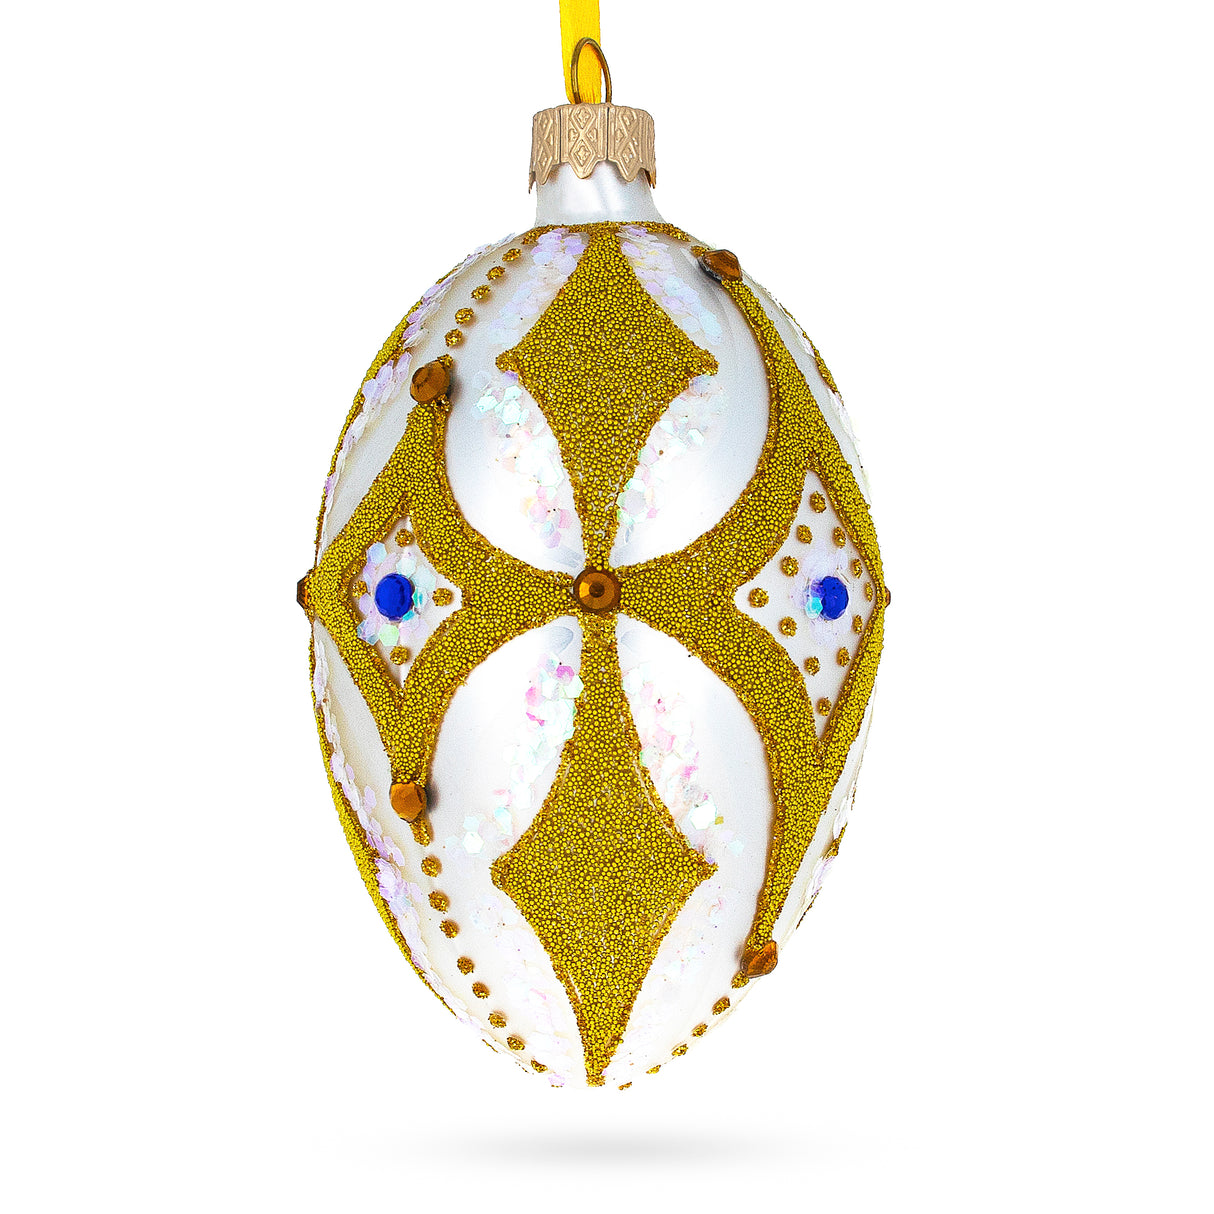 Glass Golden Rhombus On White Glass Egg Ornament 4 Inches in Gold color Oval